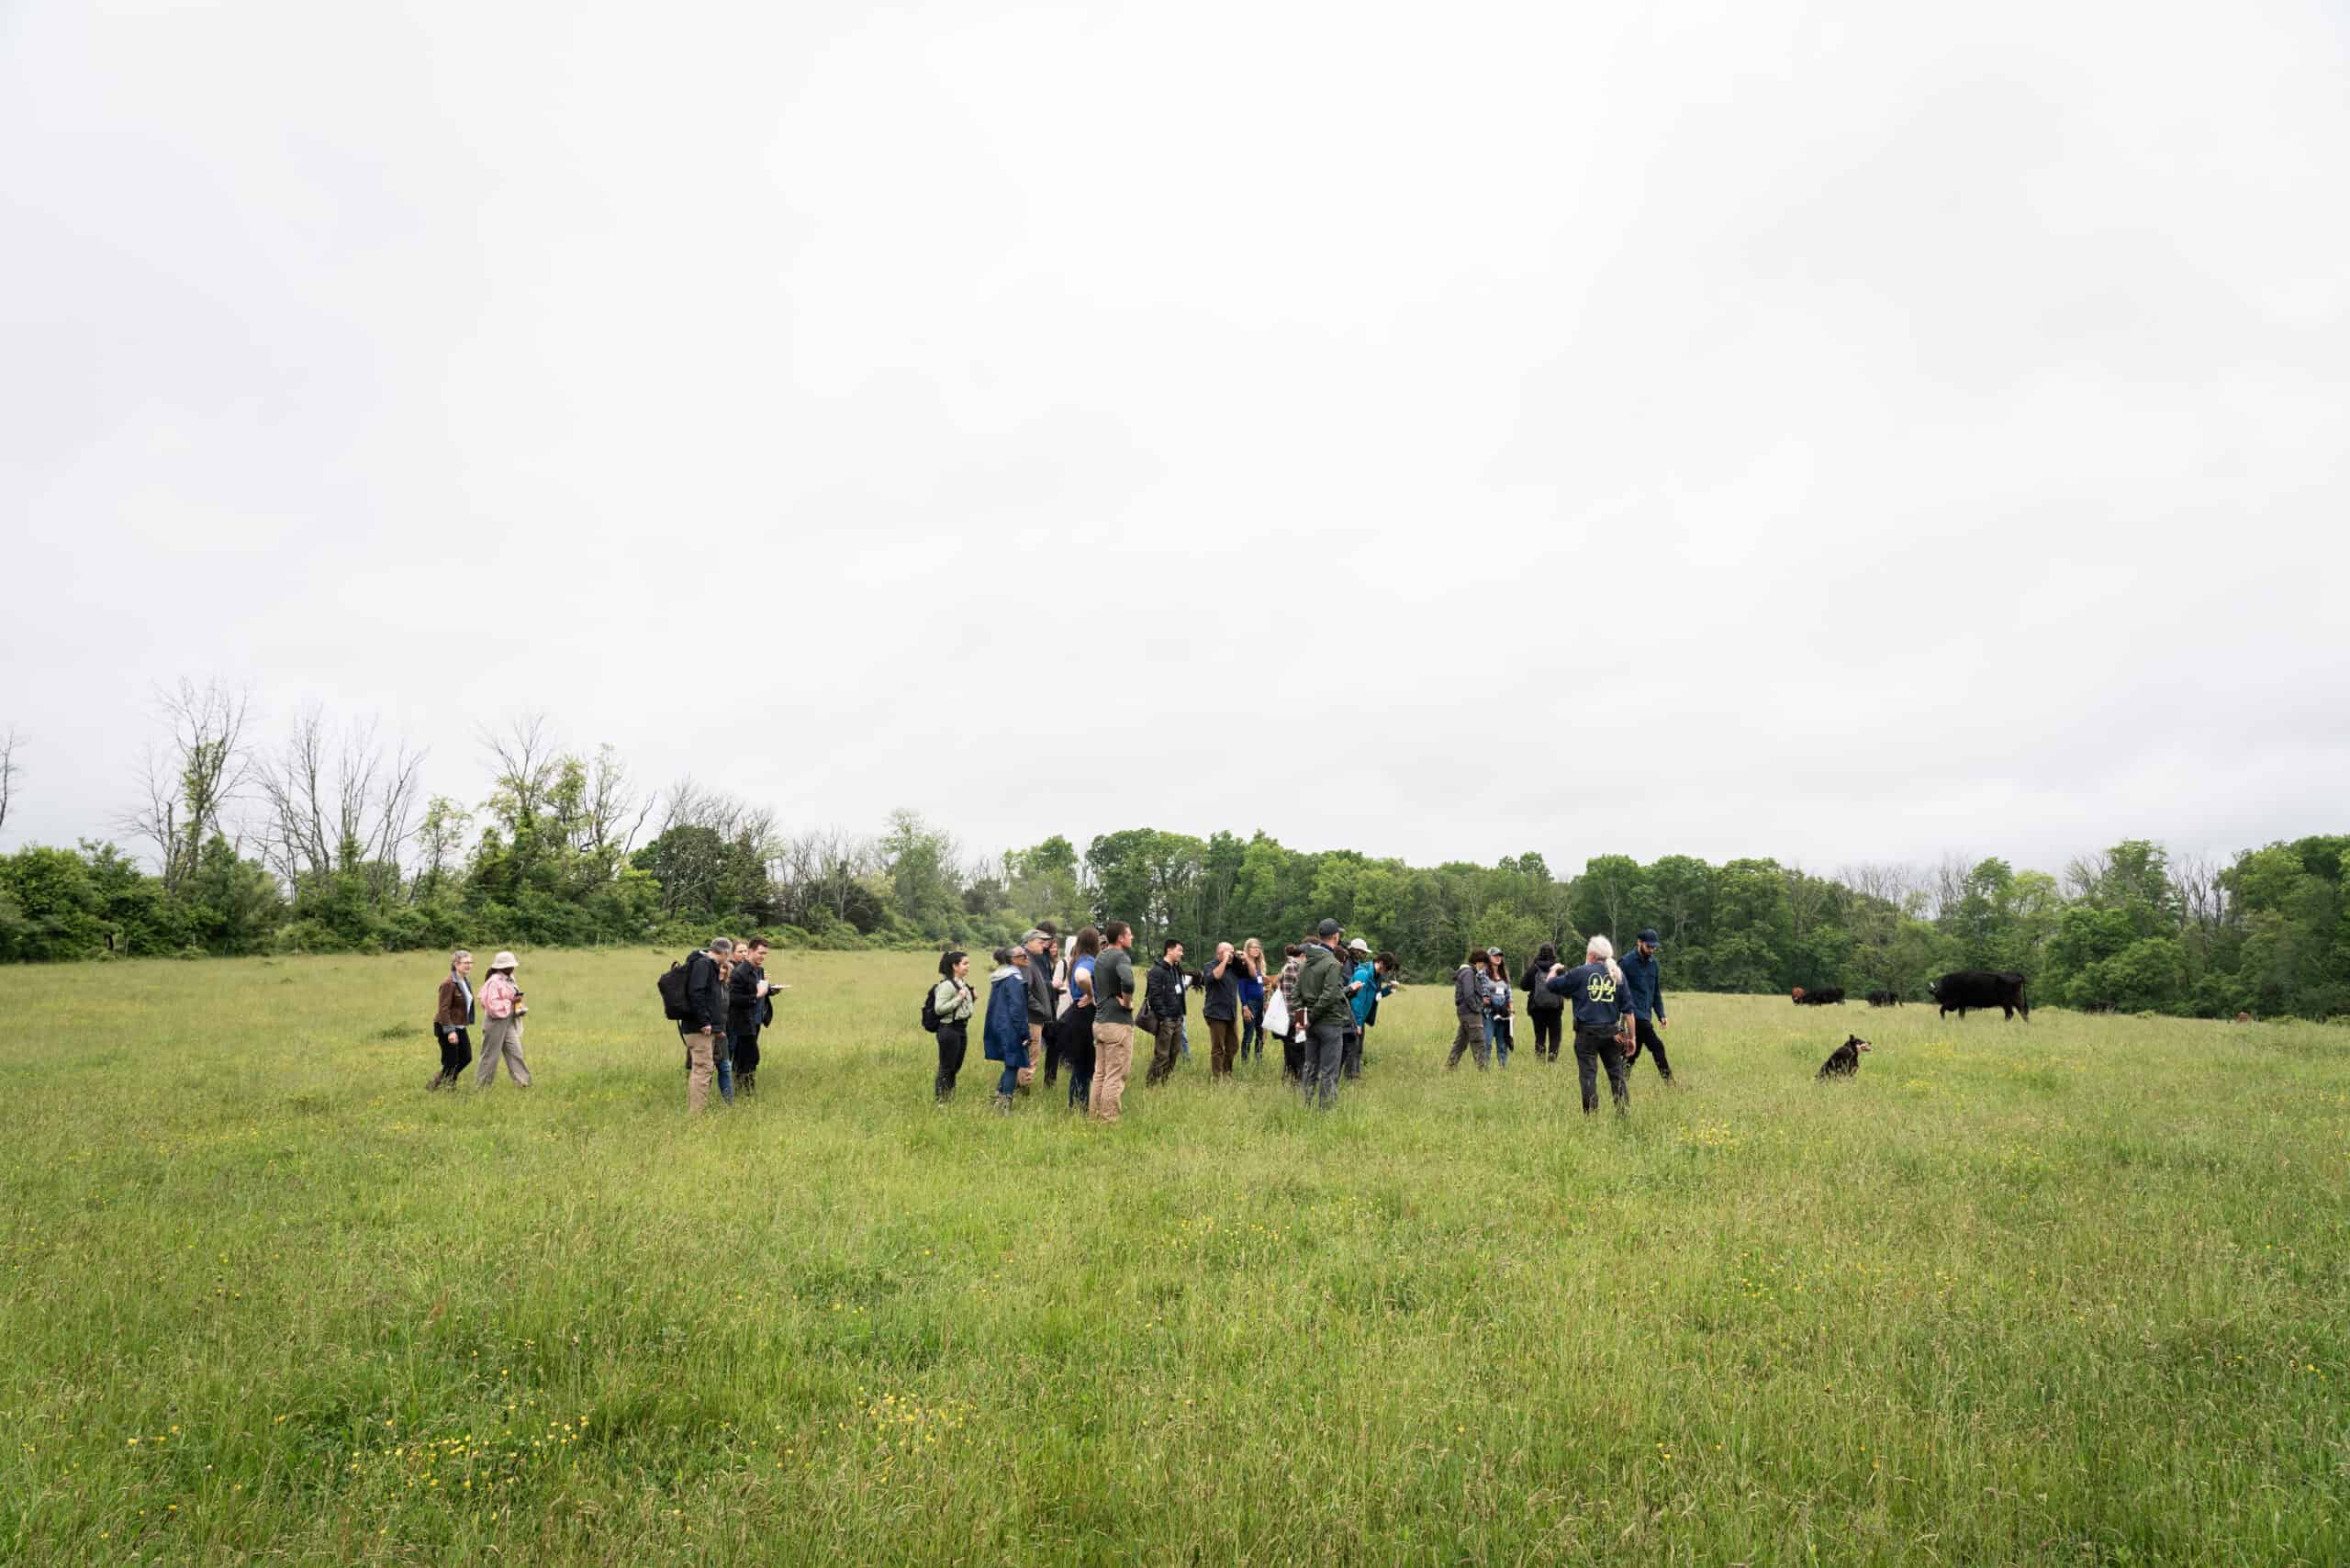 A large group of approximately 30 people walk through a field of grass.